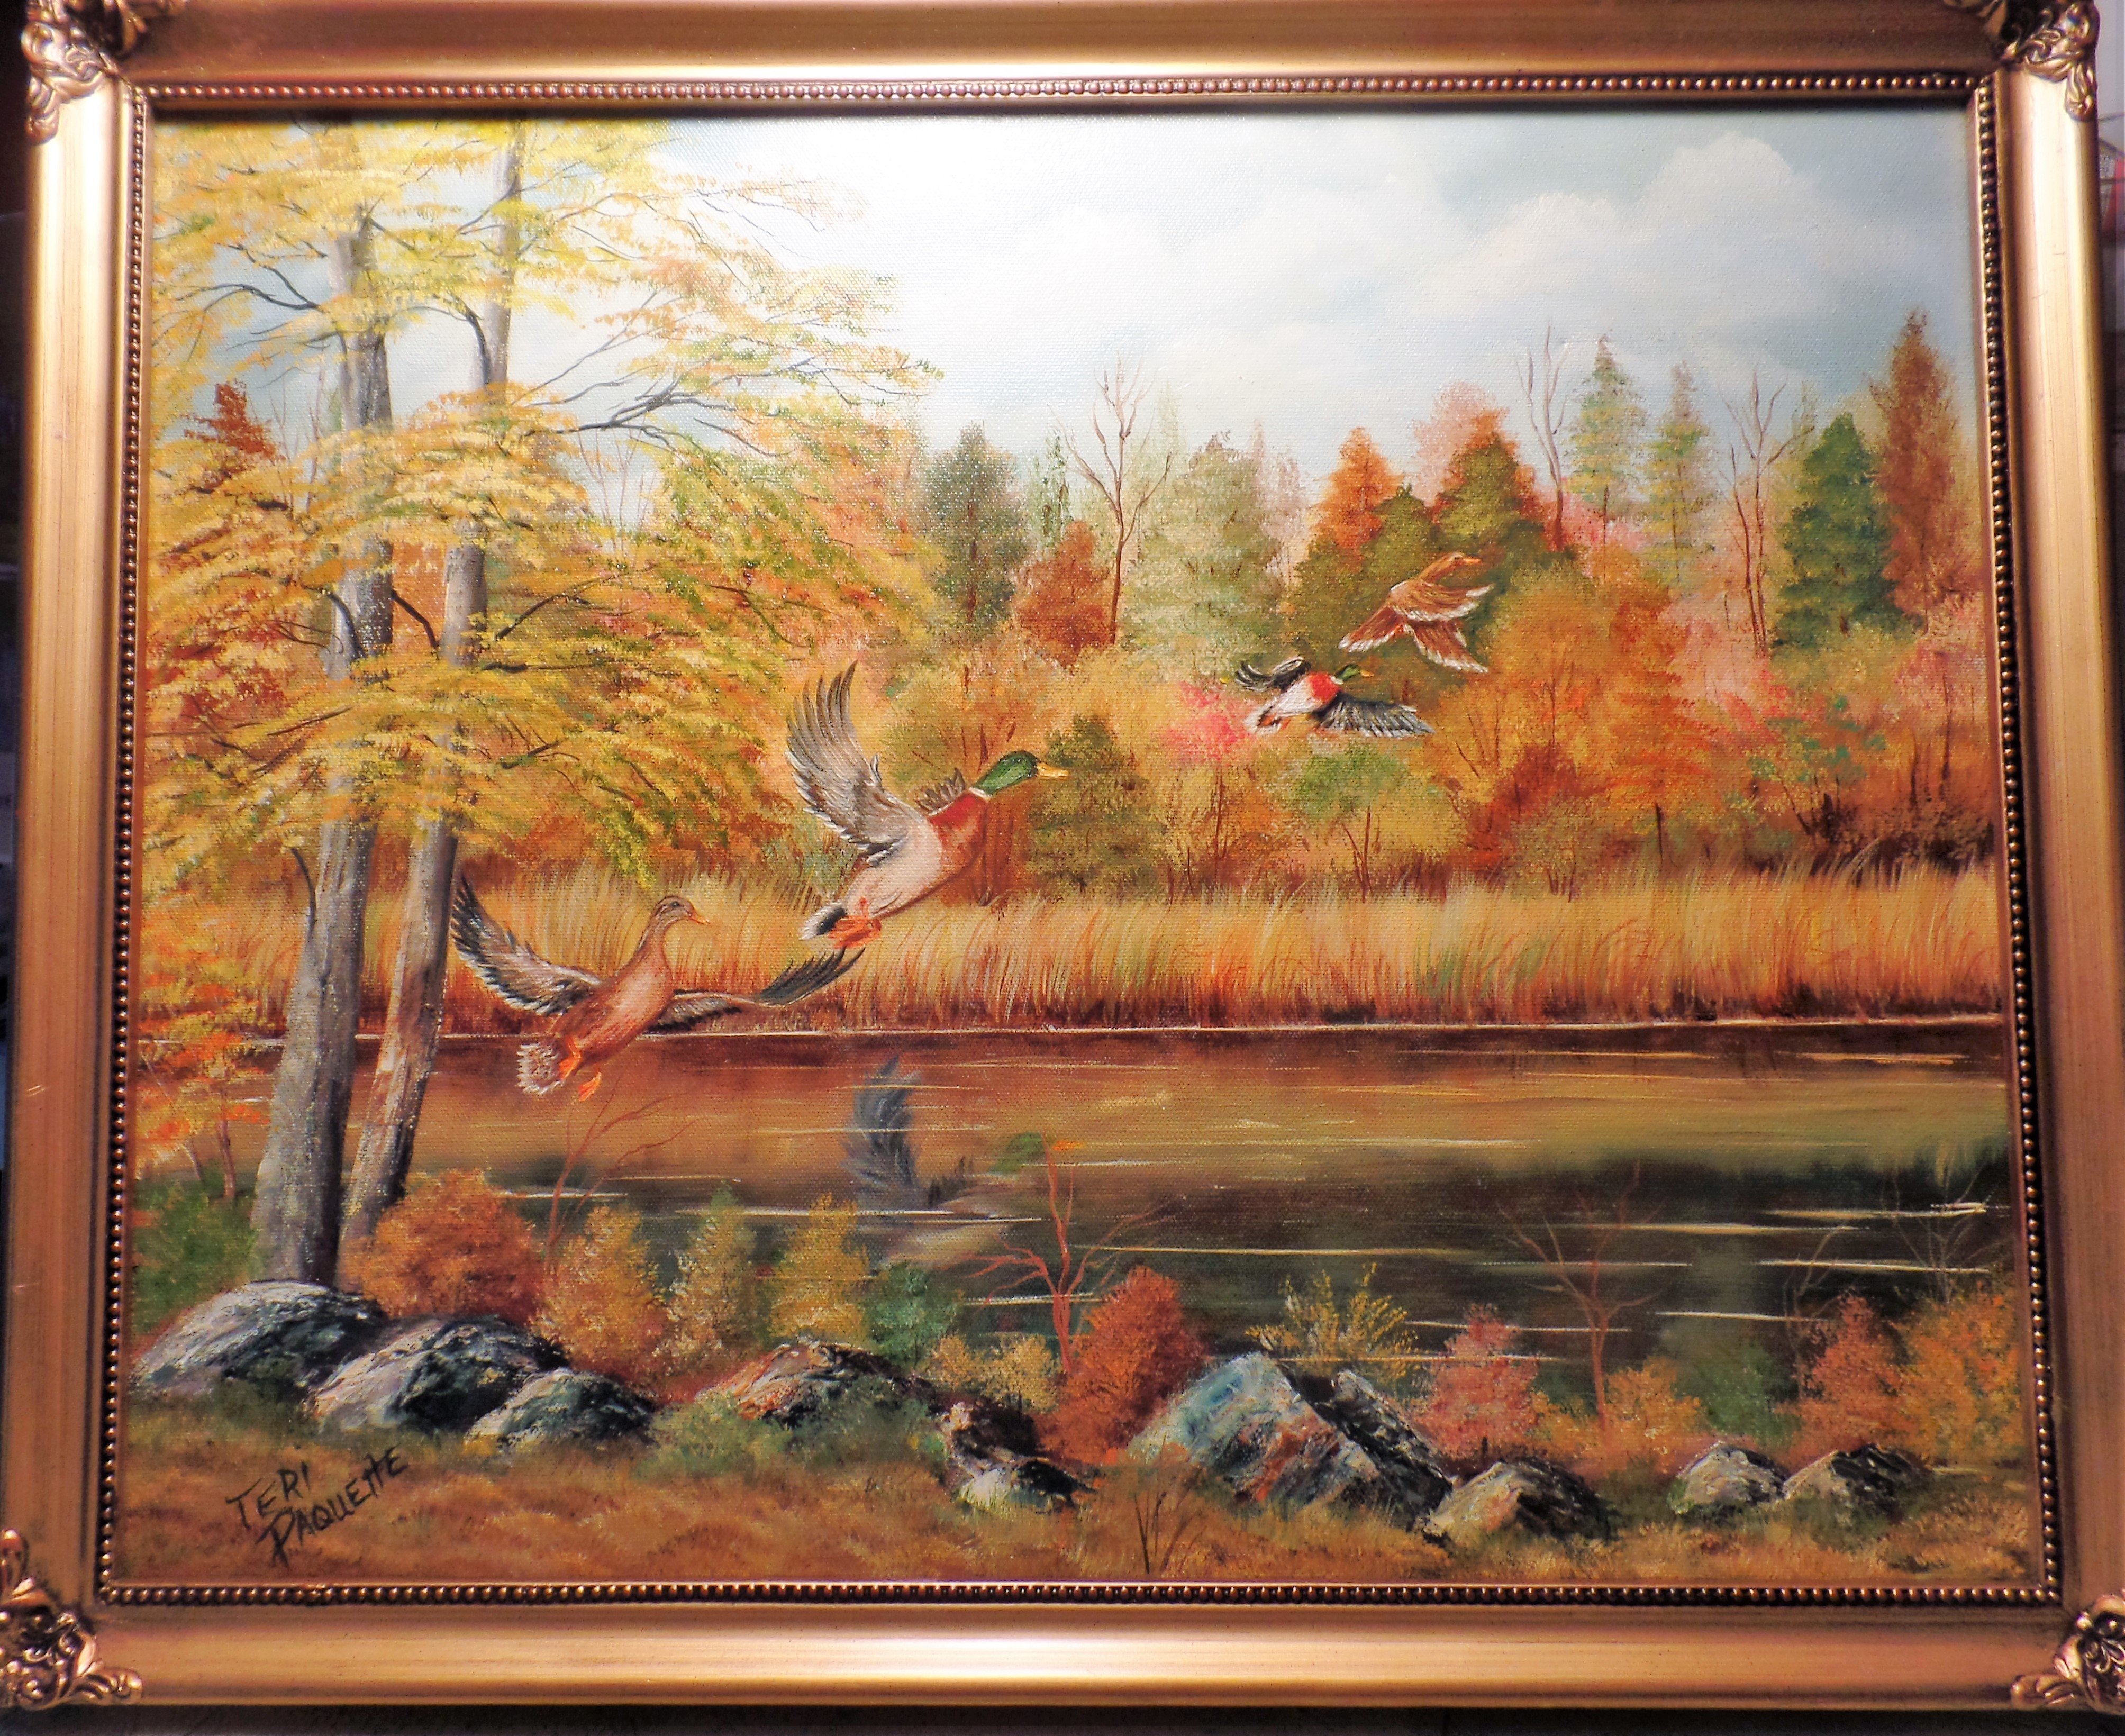 Teri Paquette; Mallards In Flight, 2019, Original Painting Oil, 22 x 18 inches. Artwork description: 241 I OFTEN TAKE LONG WALKS AND THIS SIGHT WAS A WELCOME SIGHT- IT IS AN ORIGINAL OIL PAINTING IN A ORNATE GOLD FRAME- SIGNED...